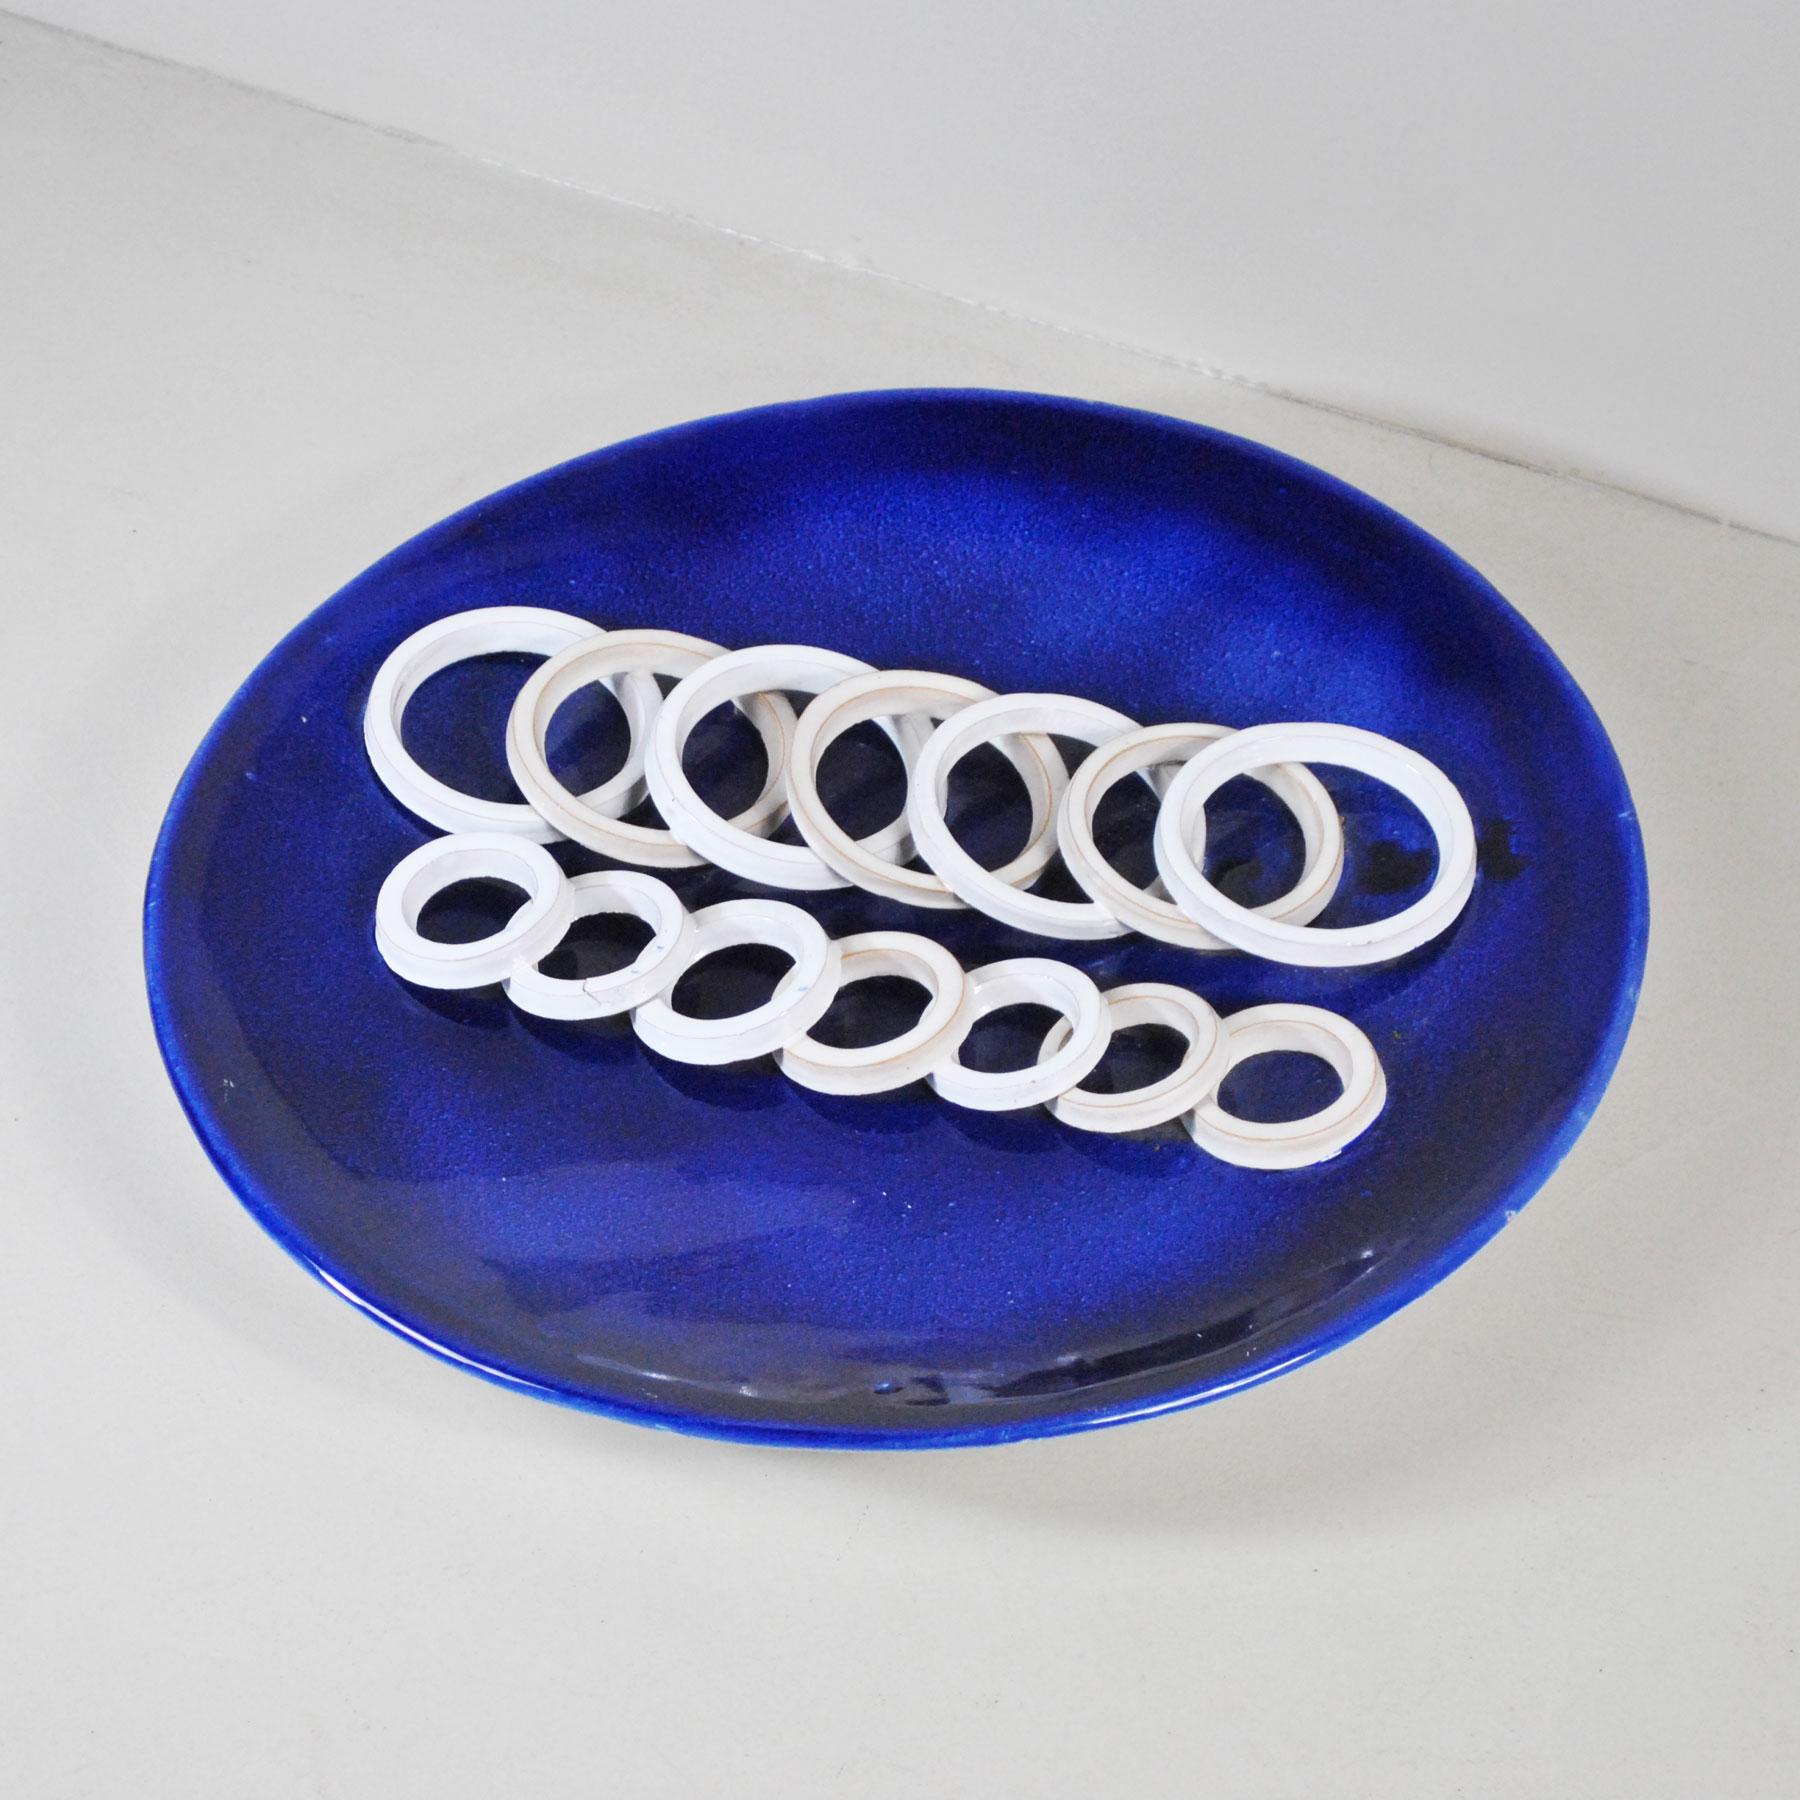 Mid-Century Modern Italian Midcentury Large Dish in Ceramic Form the 1970s For Sale